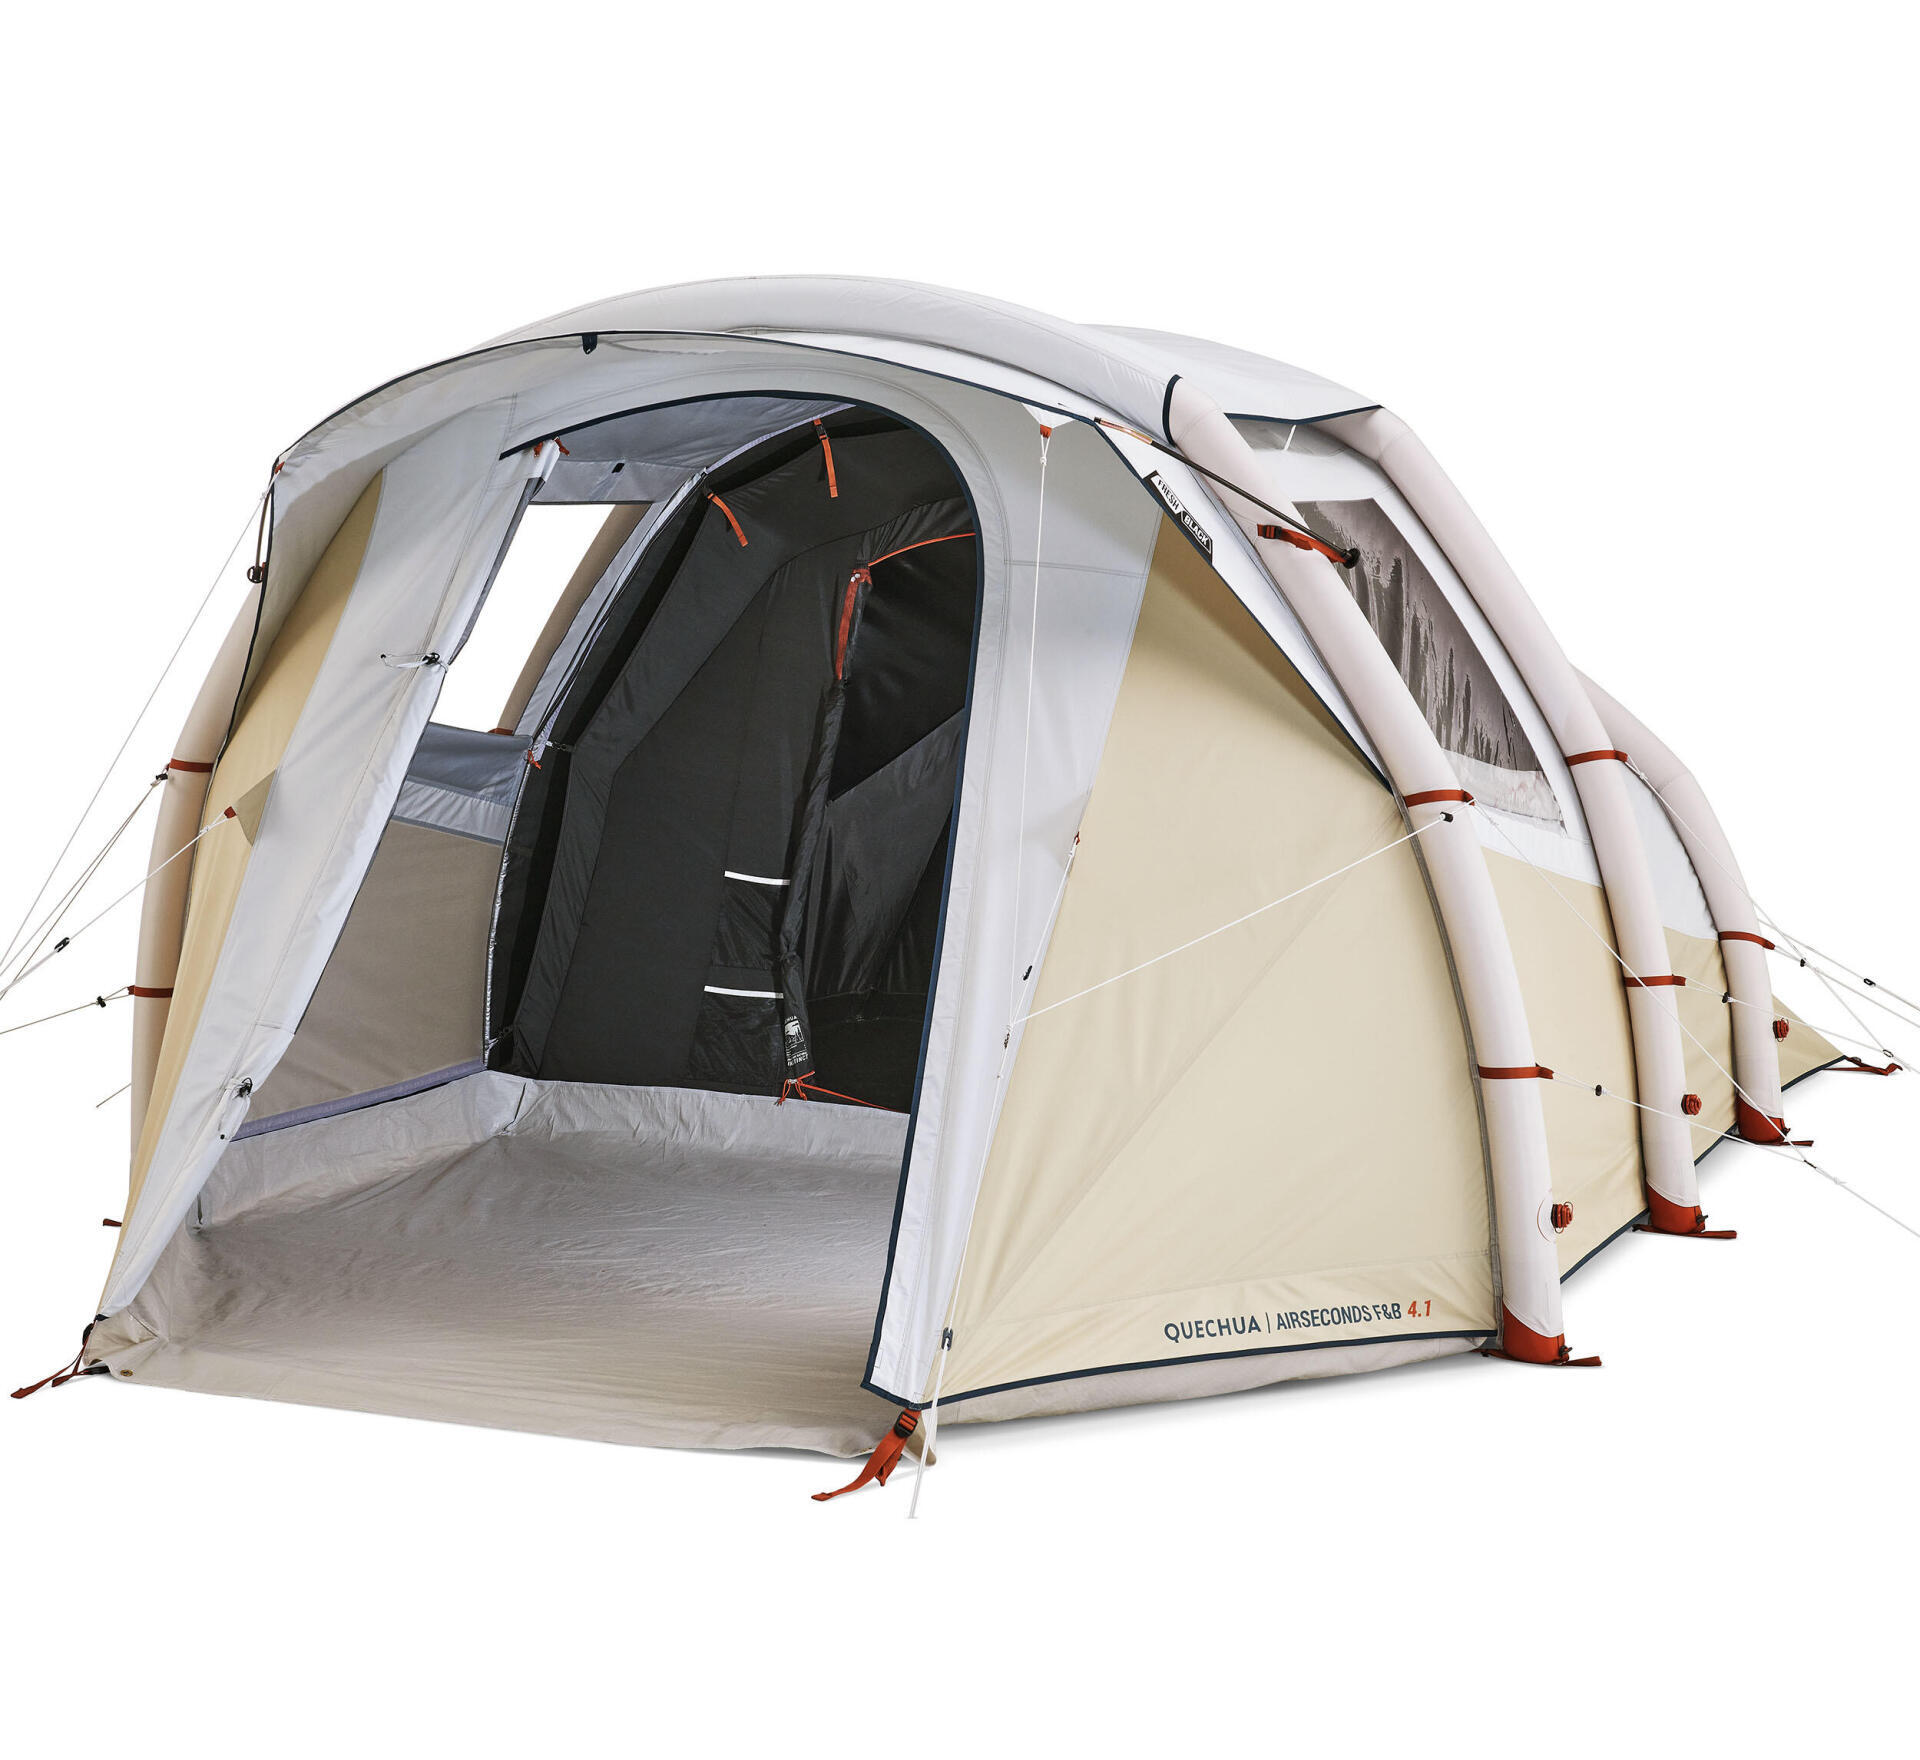 What type of tent should you choose for 4 people?